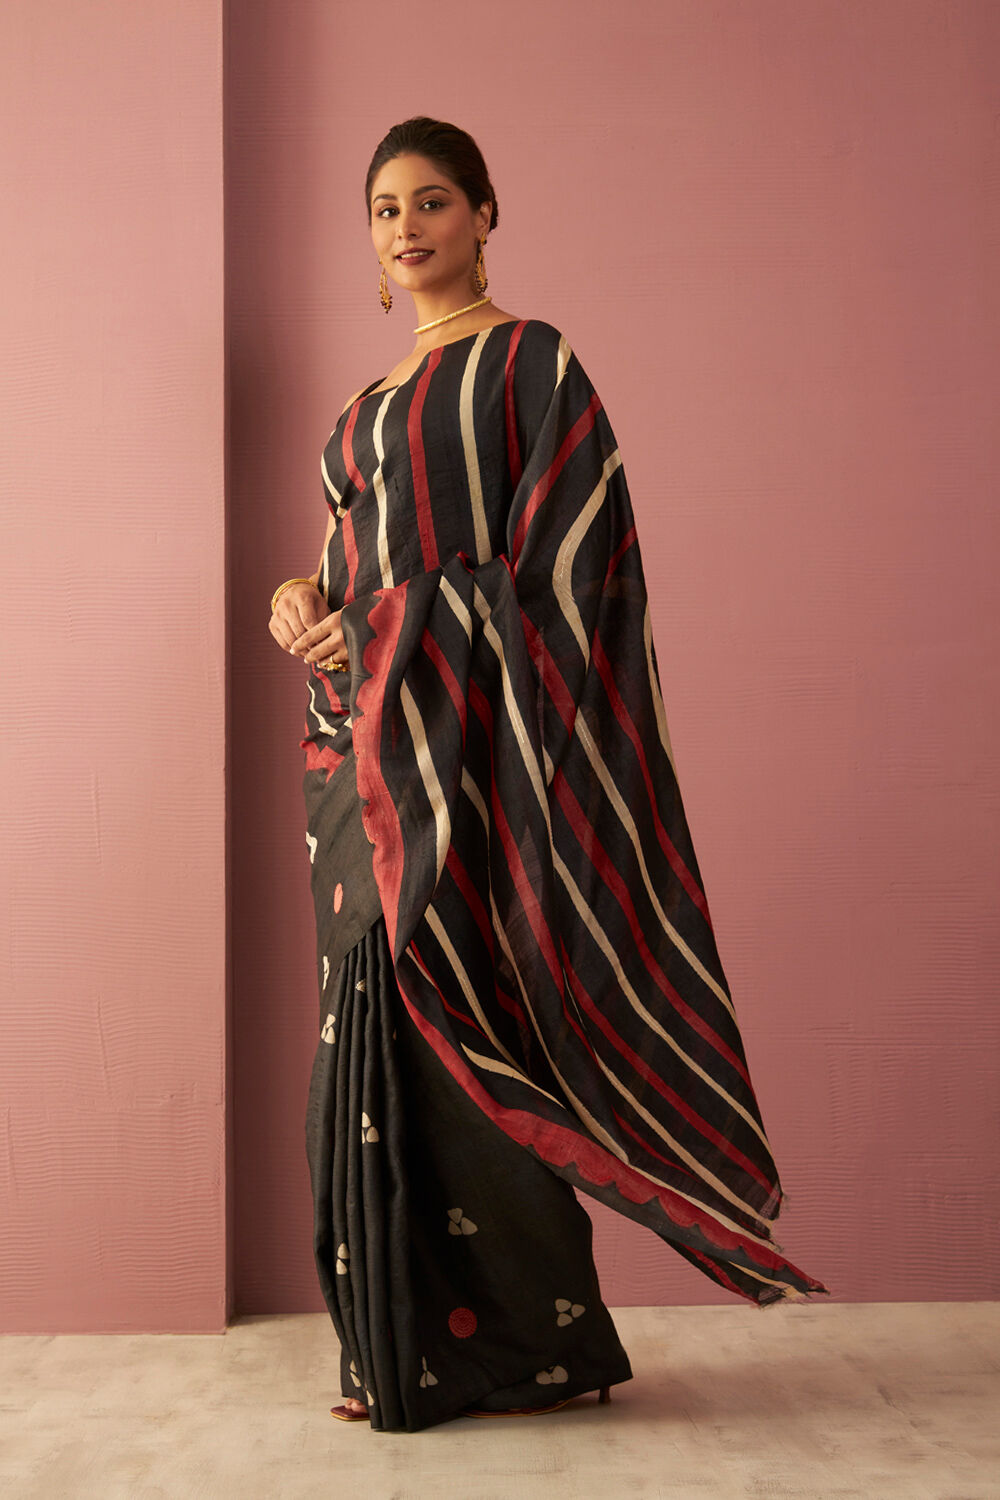 Taneira - 'I am one of Taneira's biggest fans. The collection really lives  up to the TATA product tag! My personal favorite is their silk Ikat  collection, so I chose this Rajkot